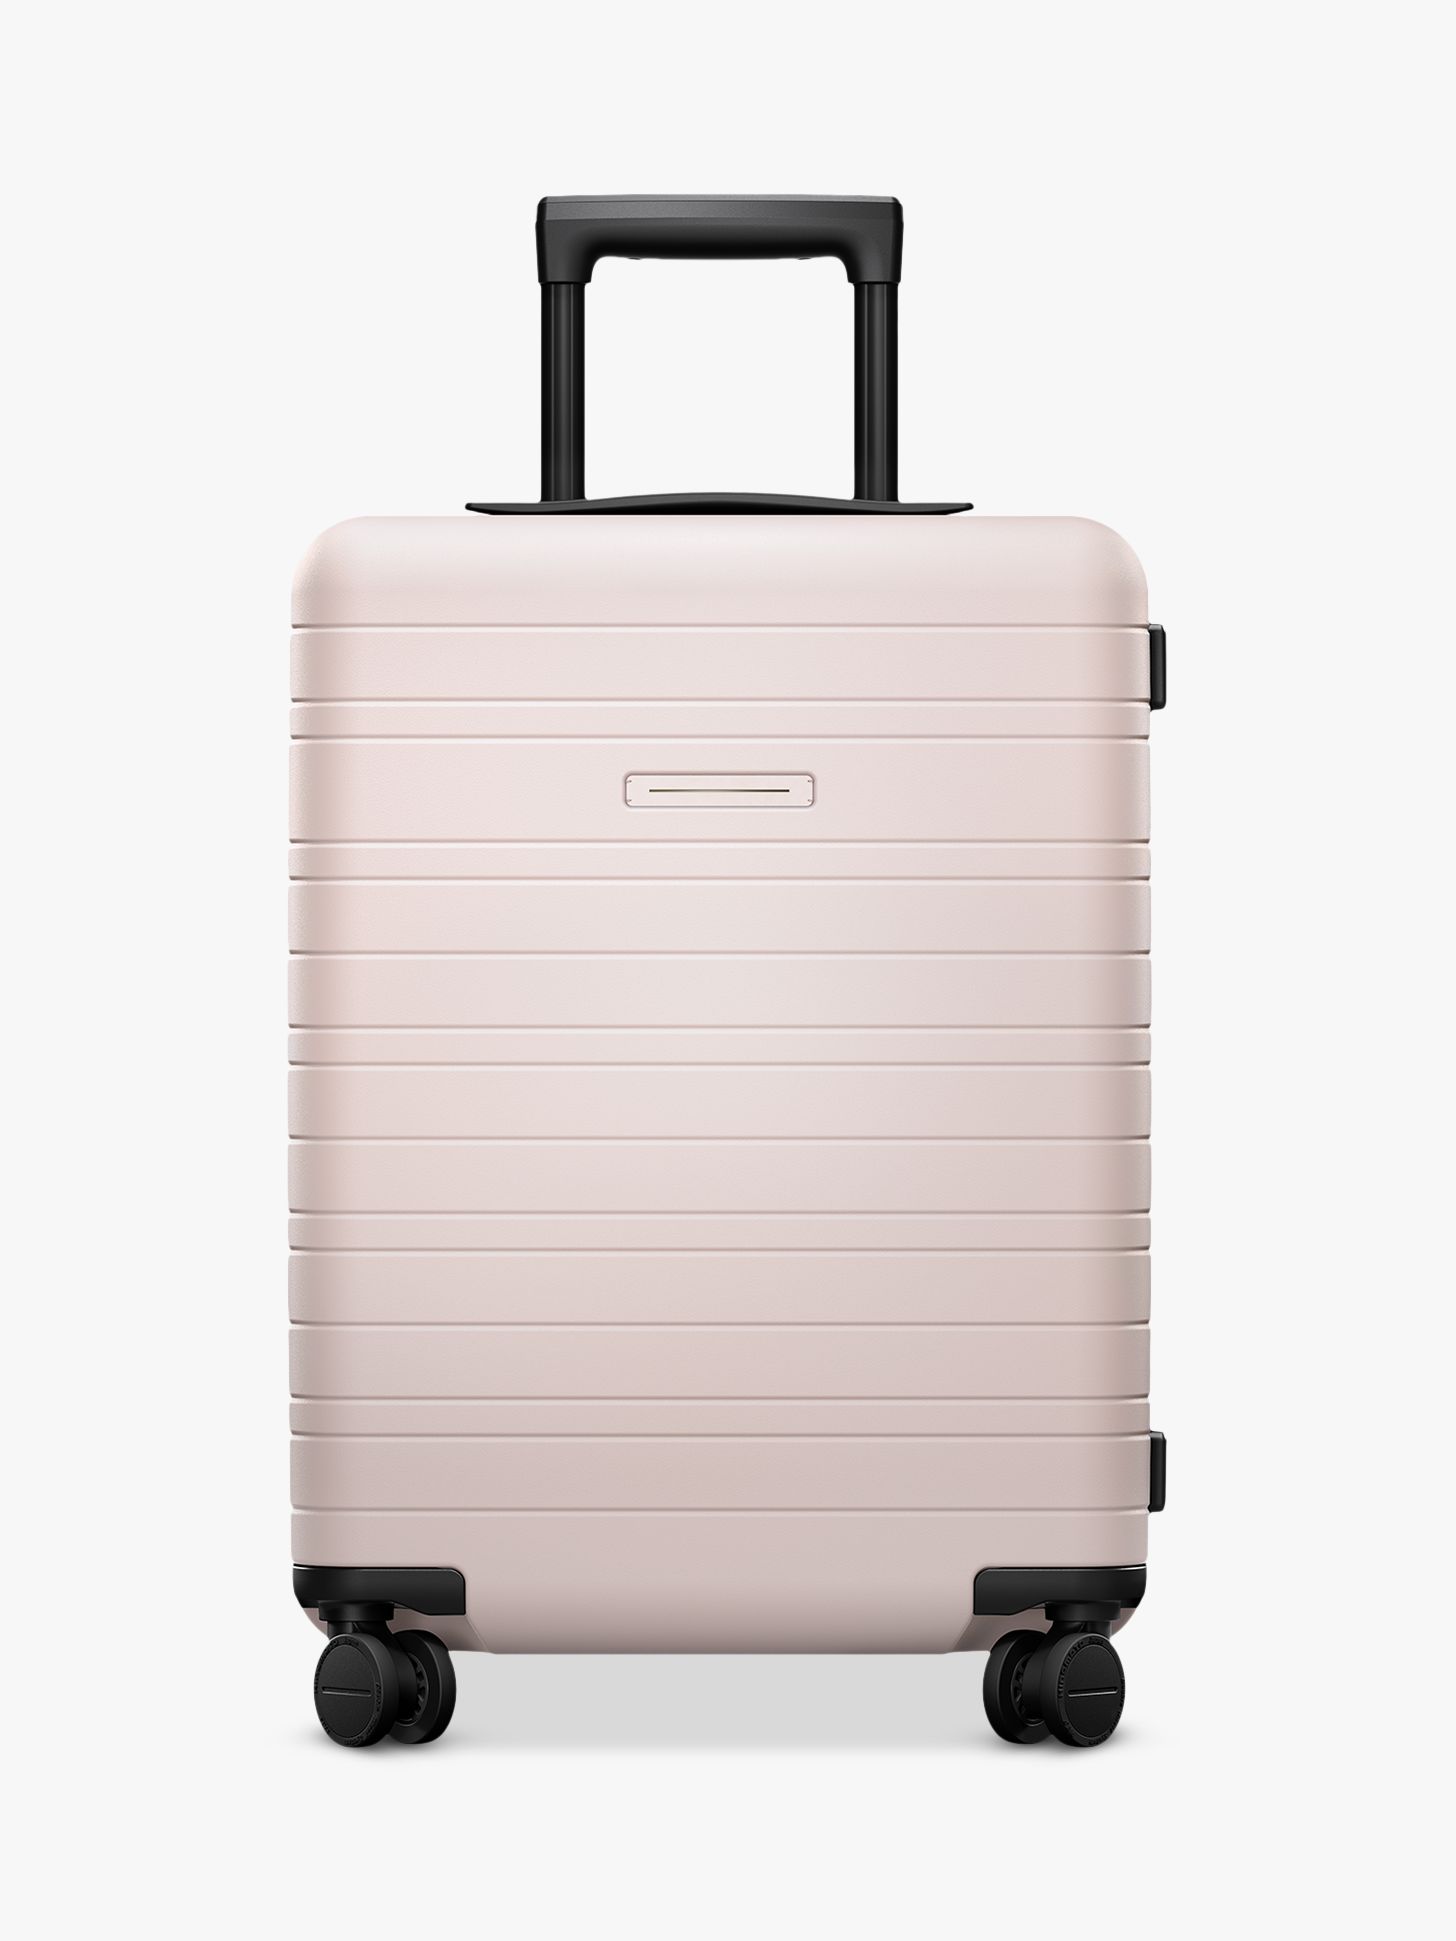 cabin luggage online